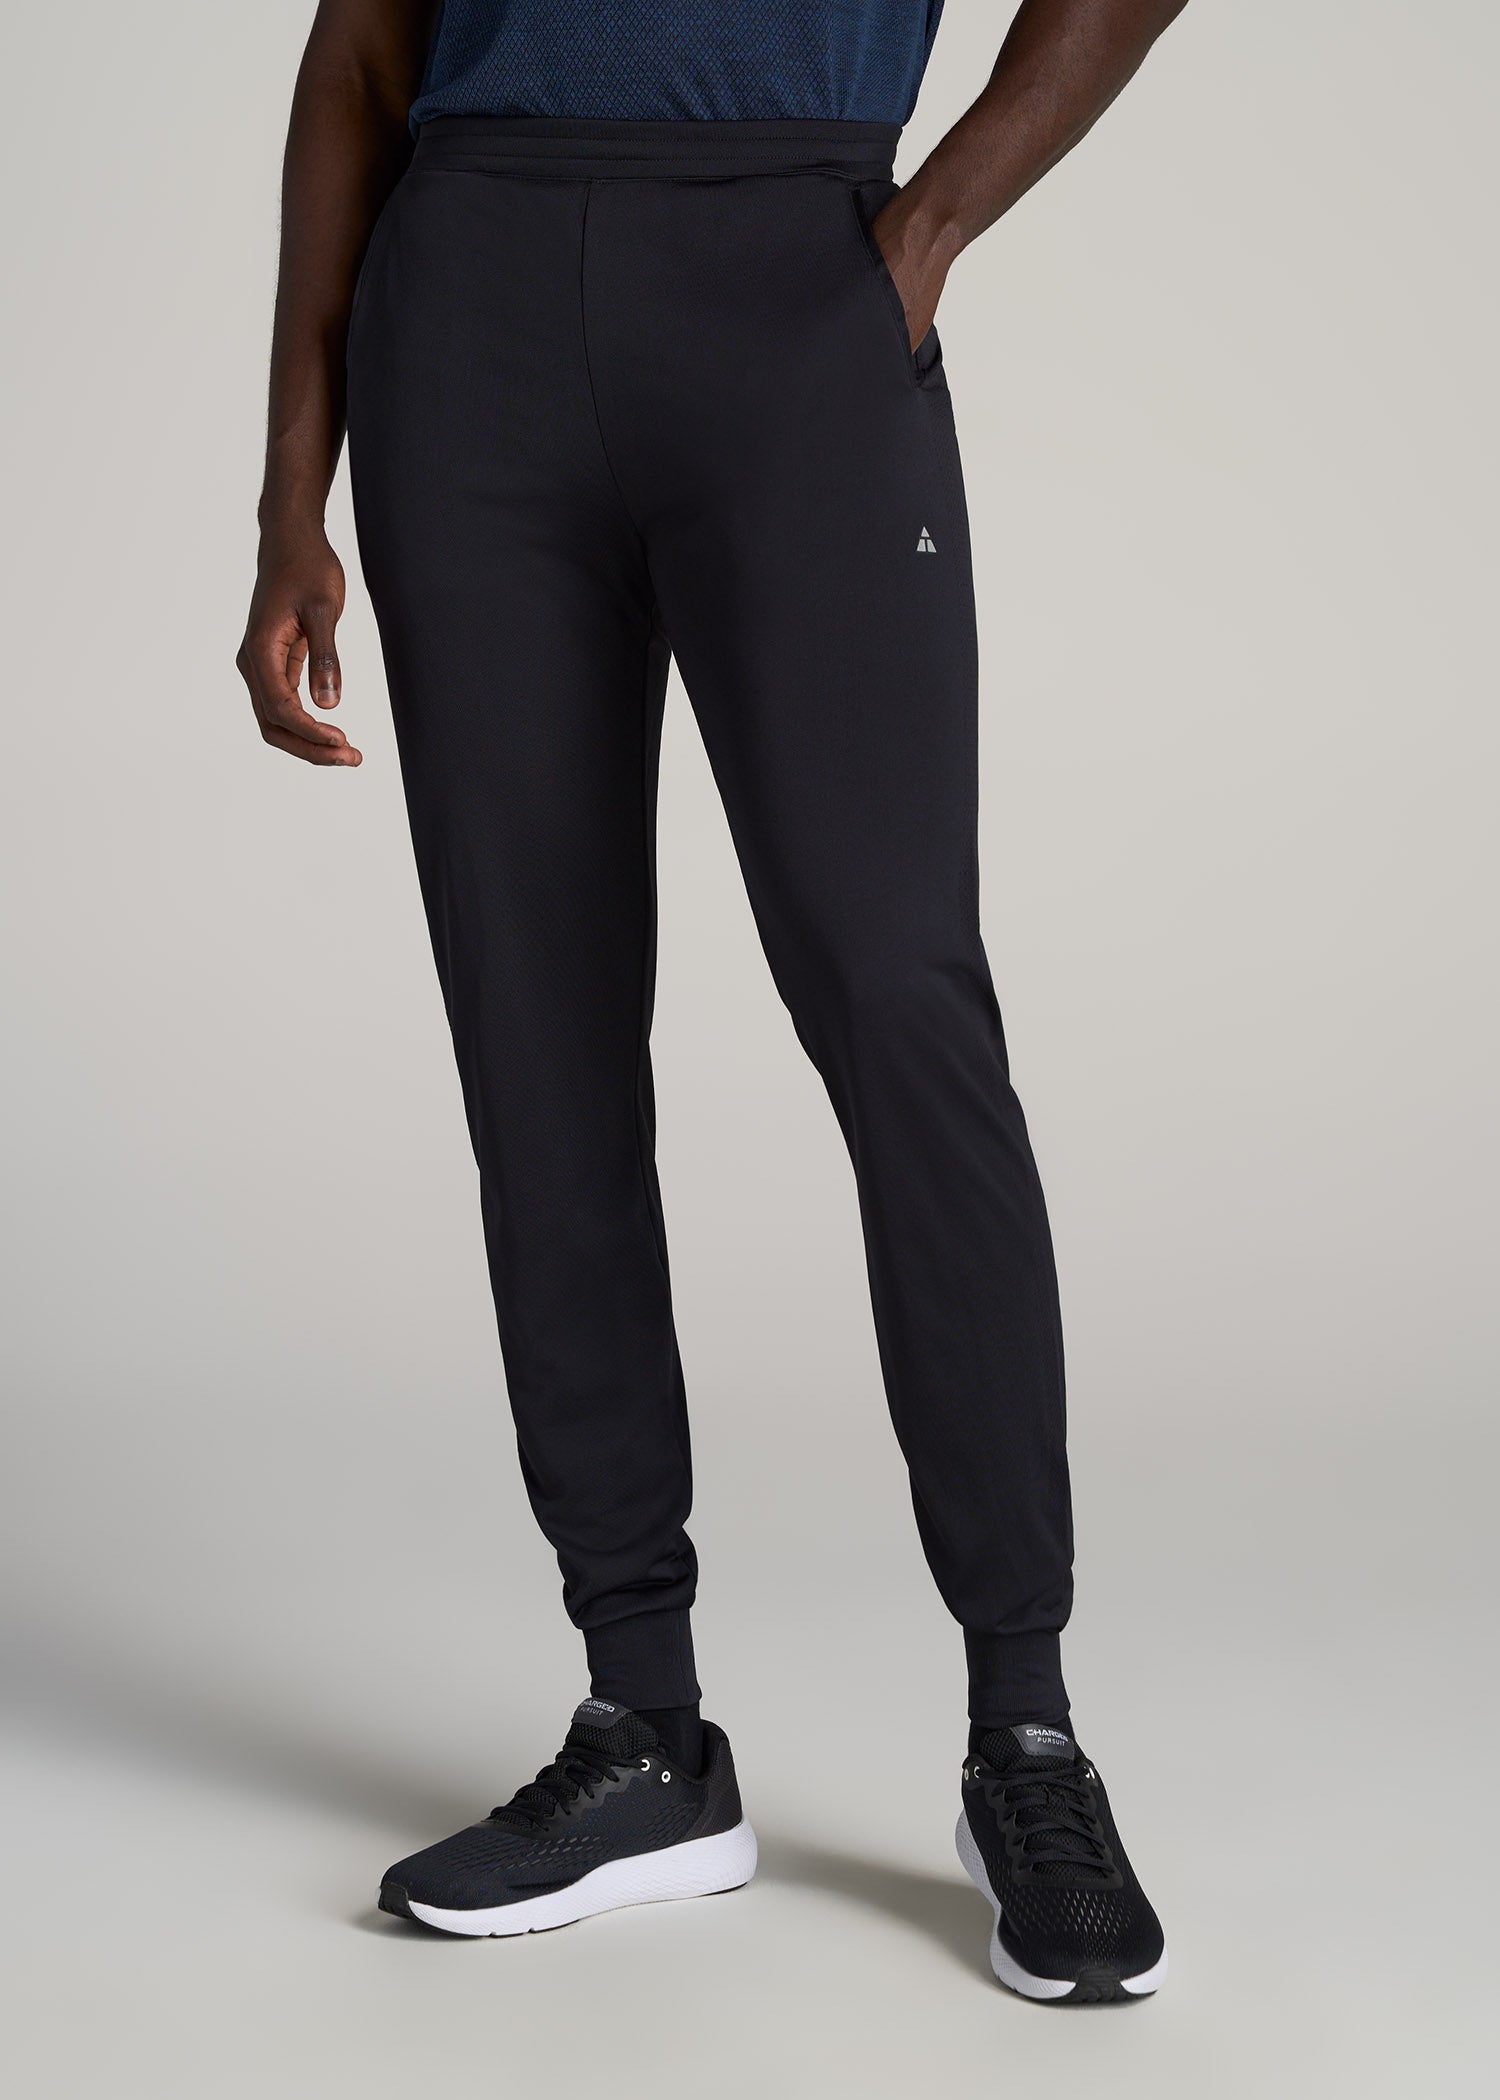 RELAXED FIT Lightweight Athletic Pants for Tall Men in Charcoal